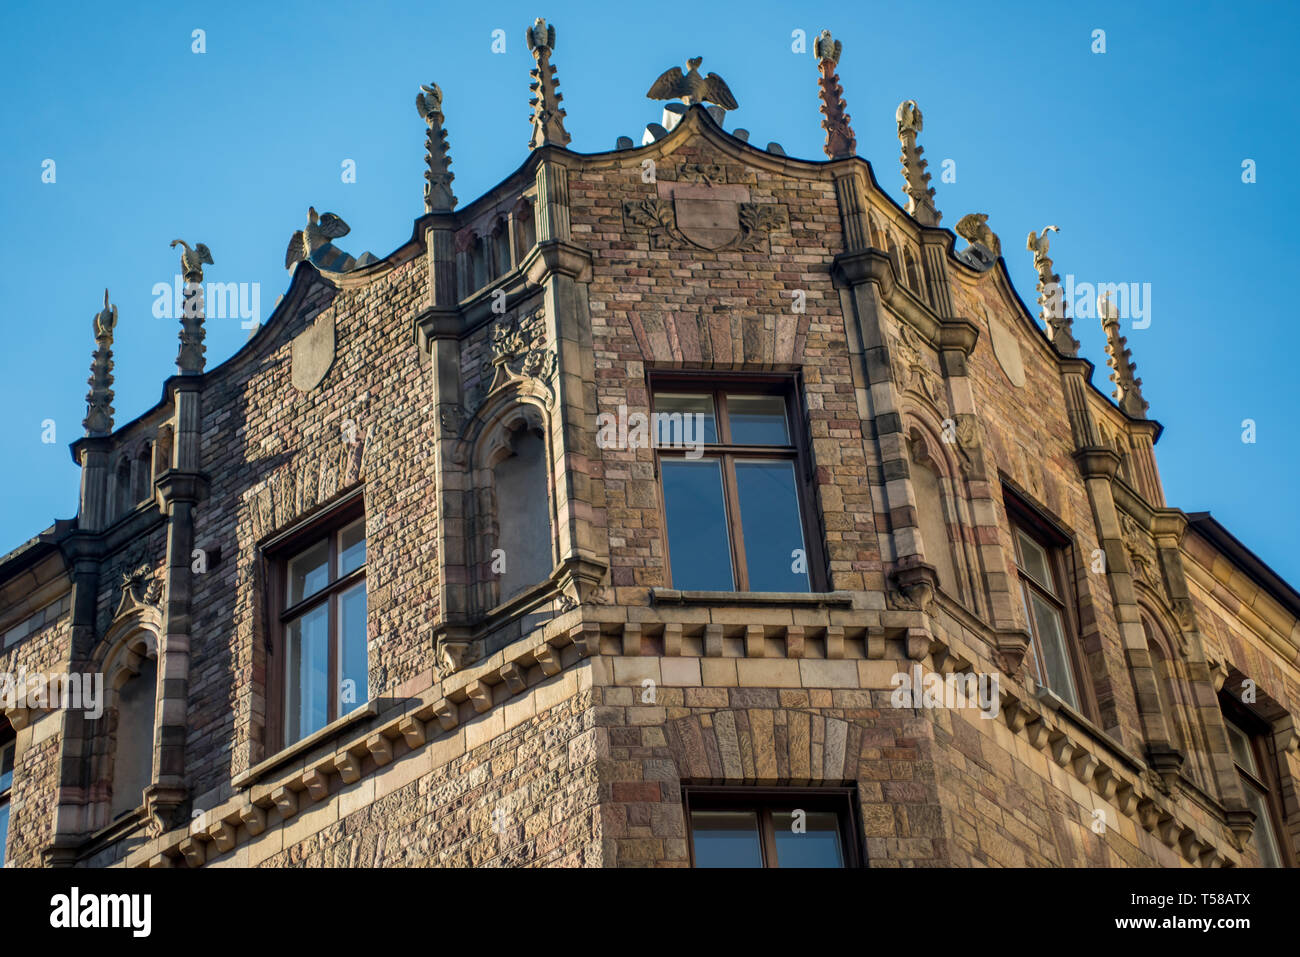 Stone birds sit atop an ornate mock gothic building in Bibliotekstan, the exclusive shopping district in Stockholm Stock Photo